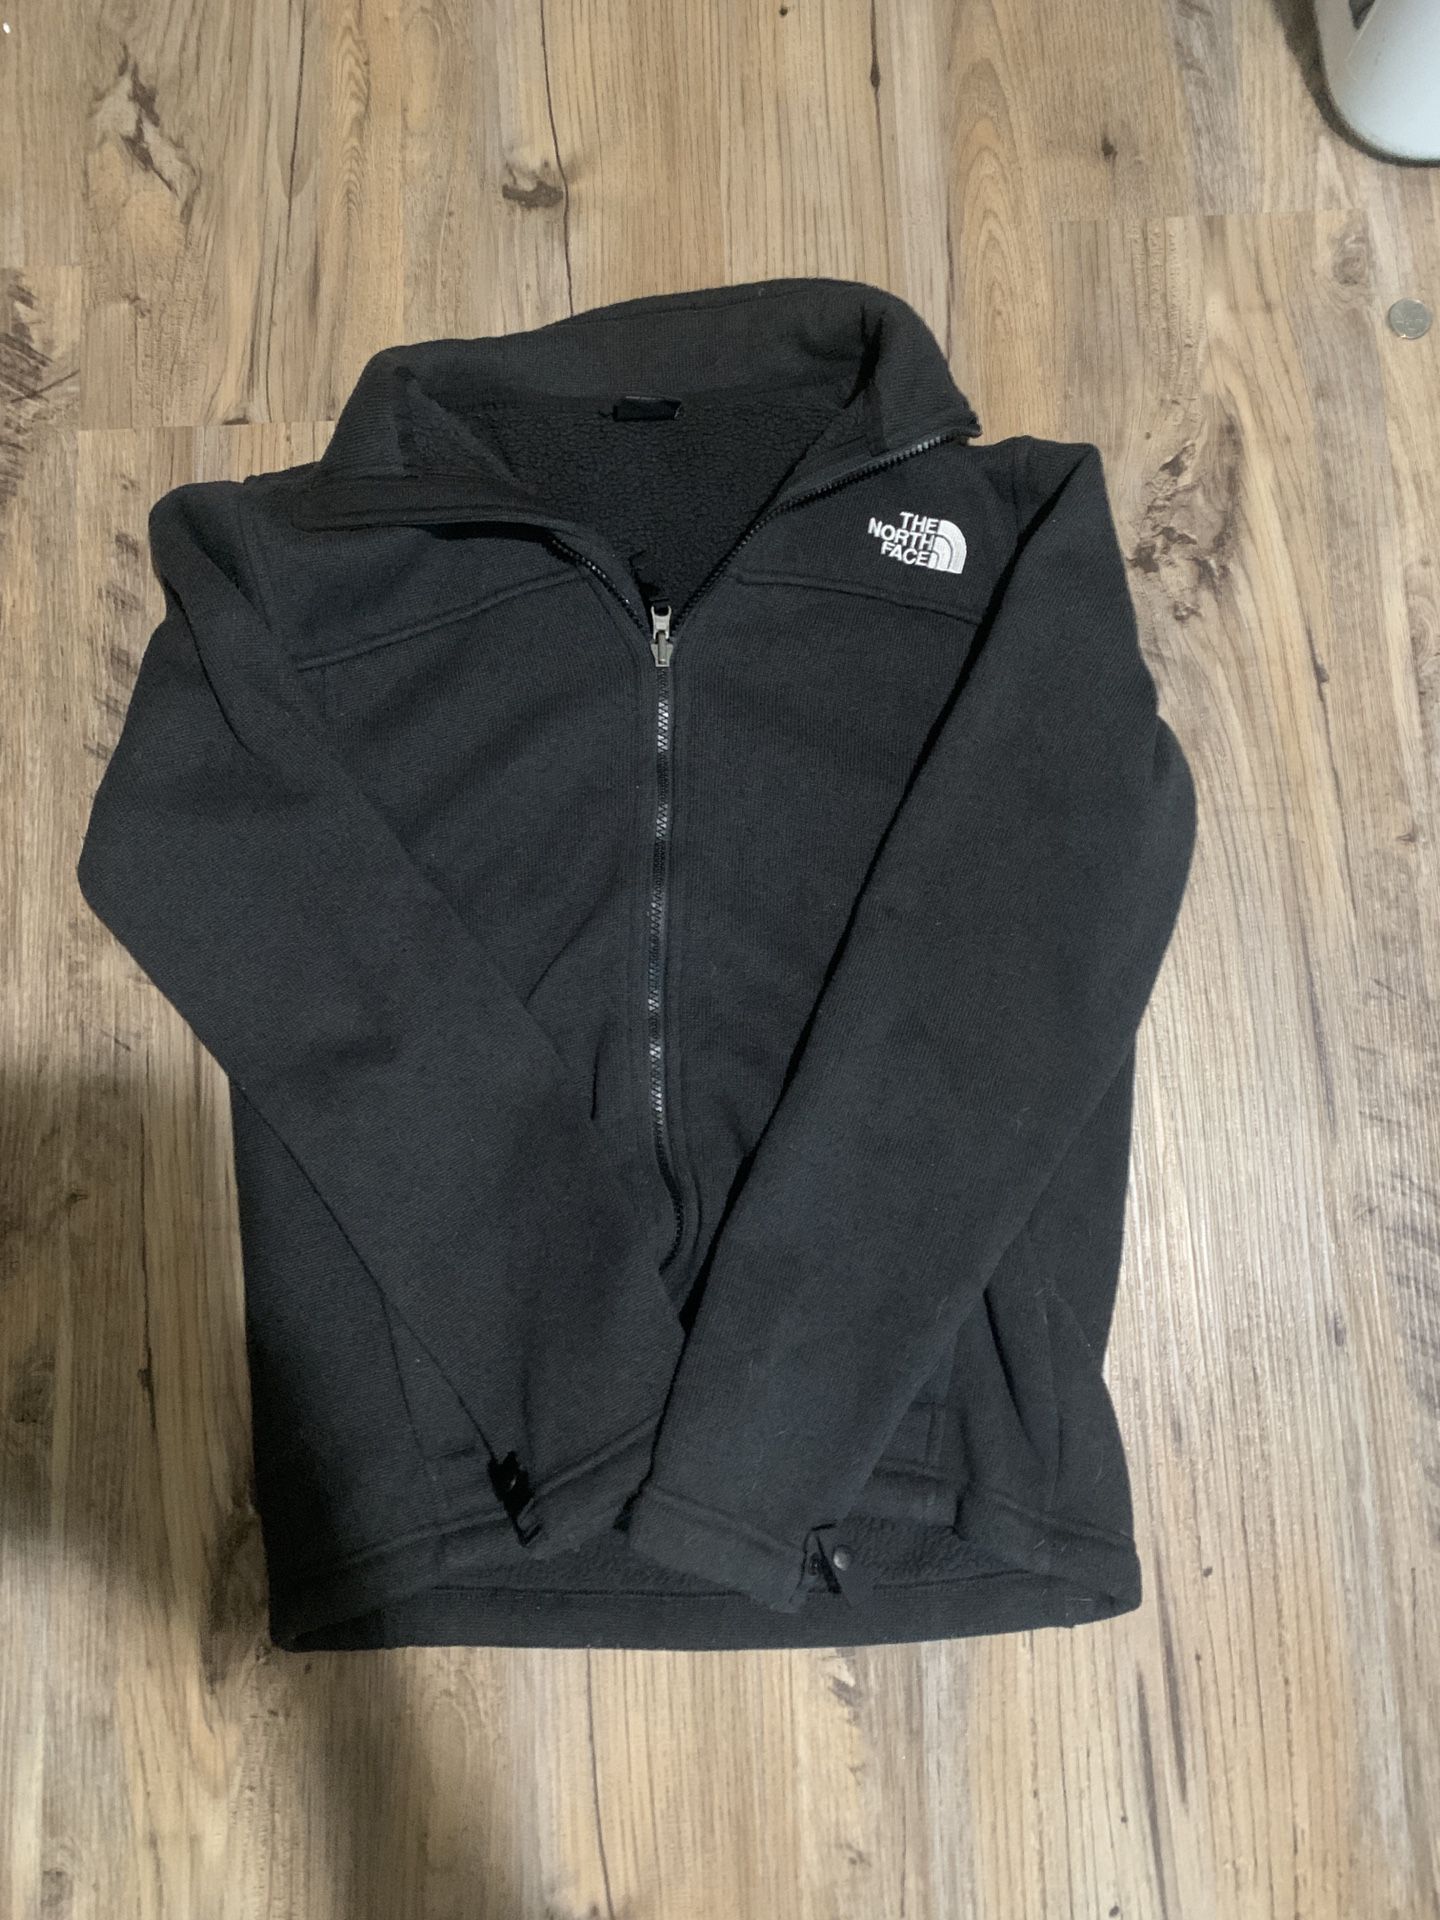 Black North Face Jacket Size Small